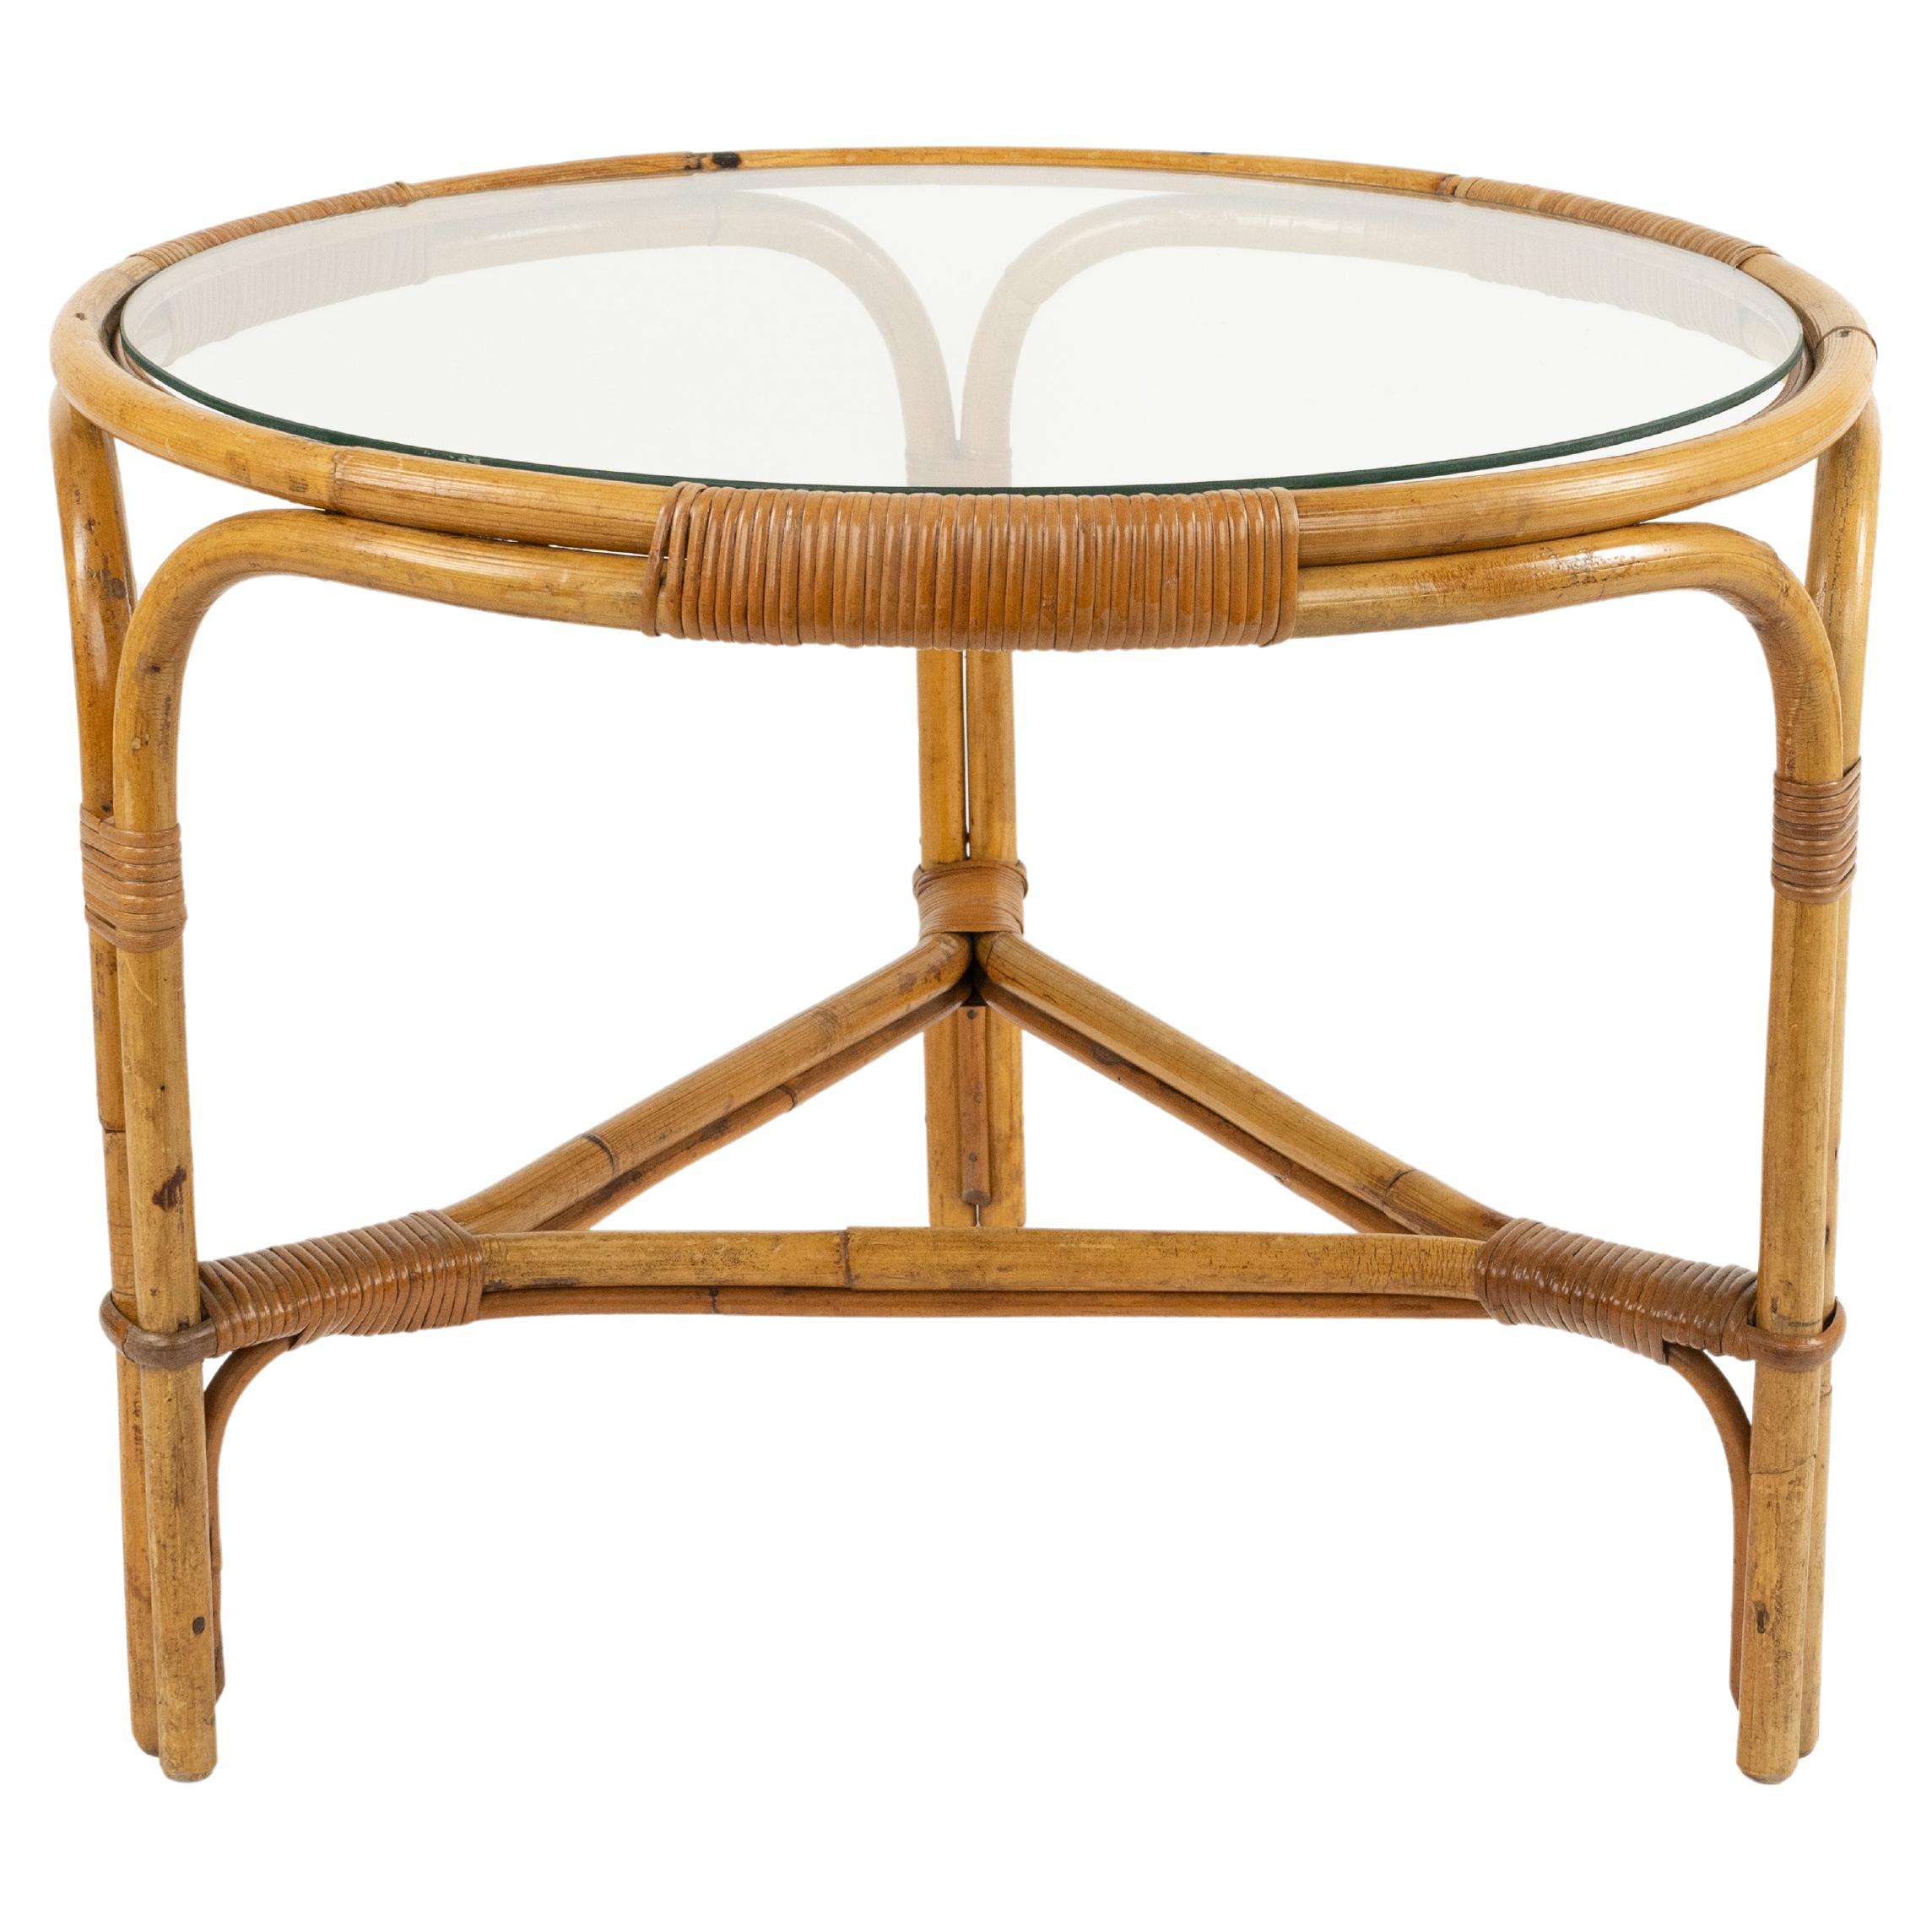 Midcentury Round Coffee Table in Bamboo, Rattan and Glass, Italy 1960s For Sale